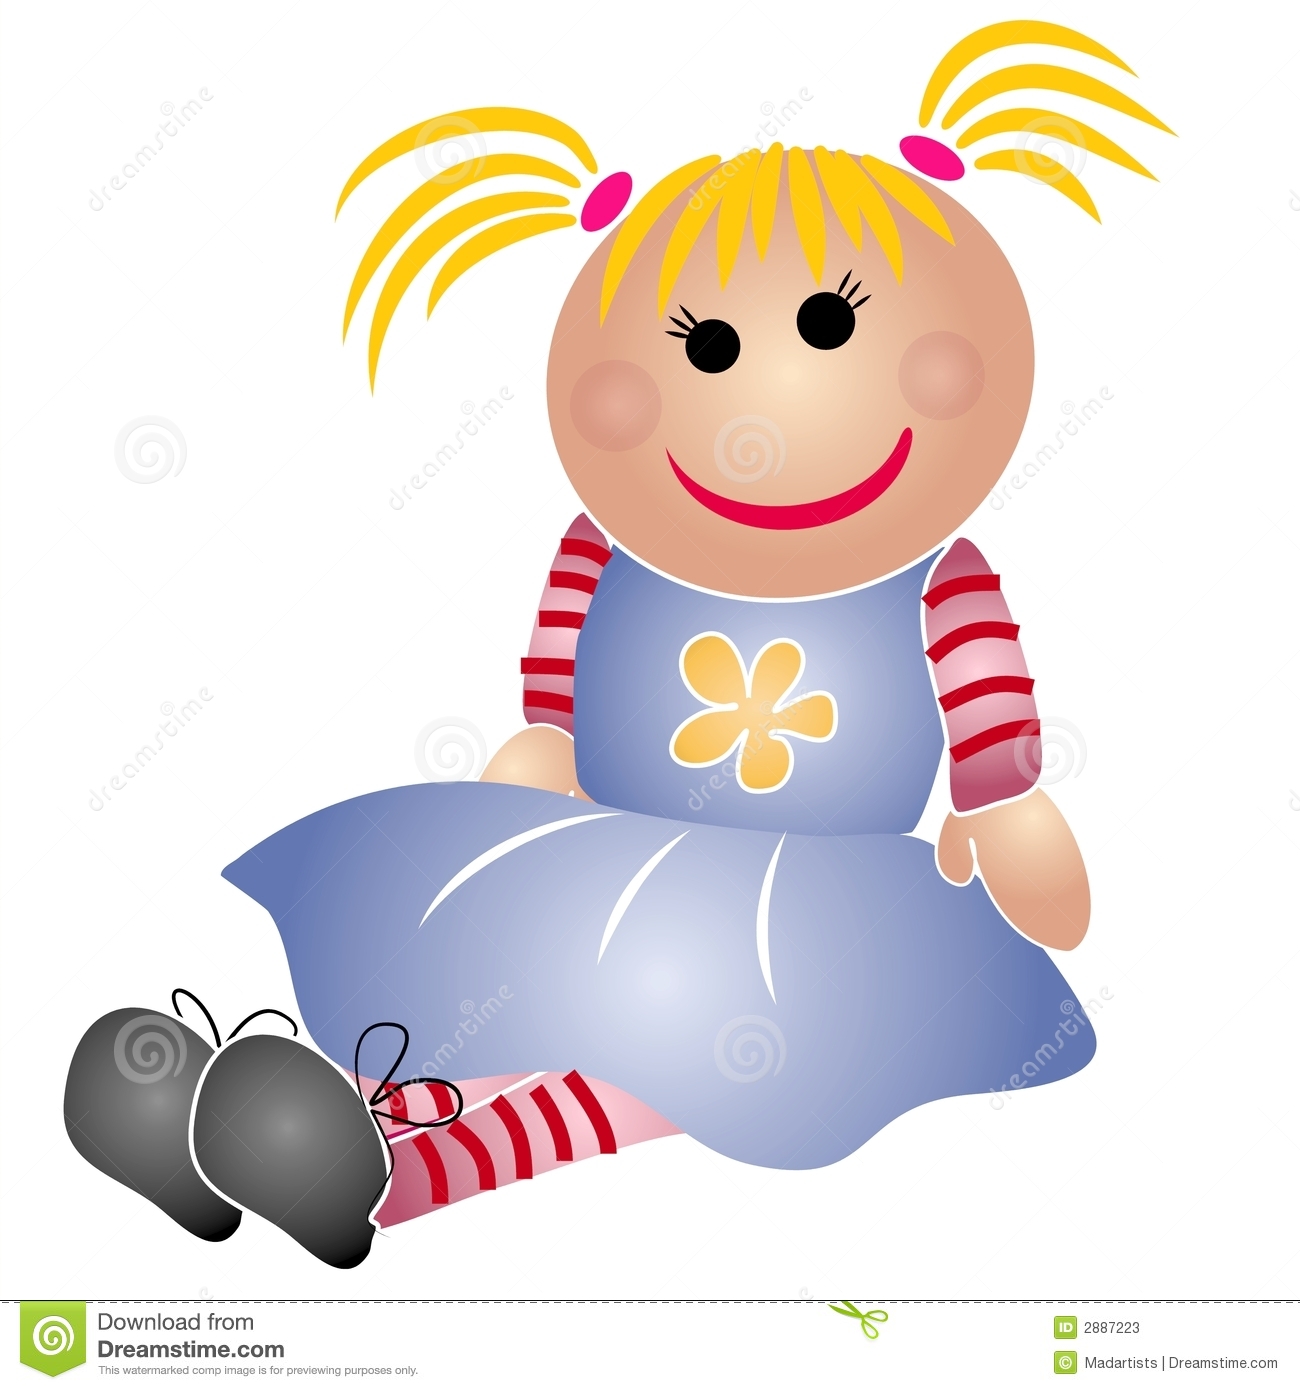 Simple Clip Art Illustration Of A Little Girl Doll Toy With Blonde